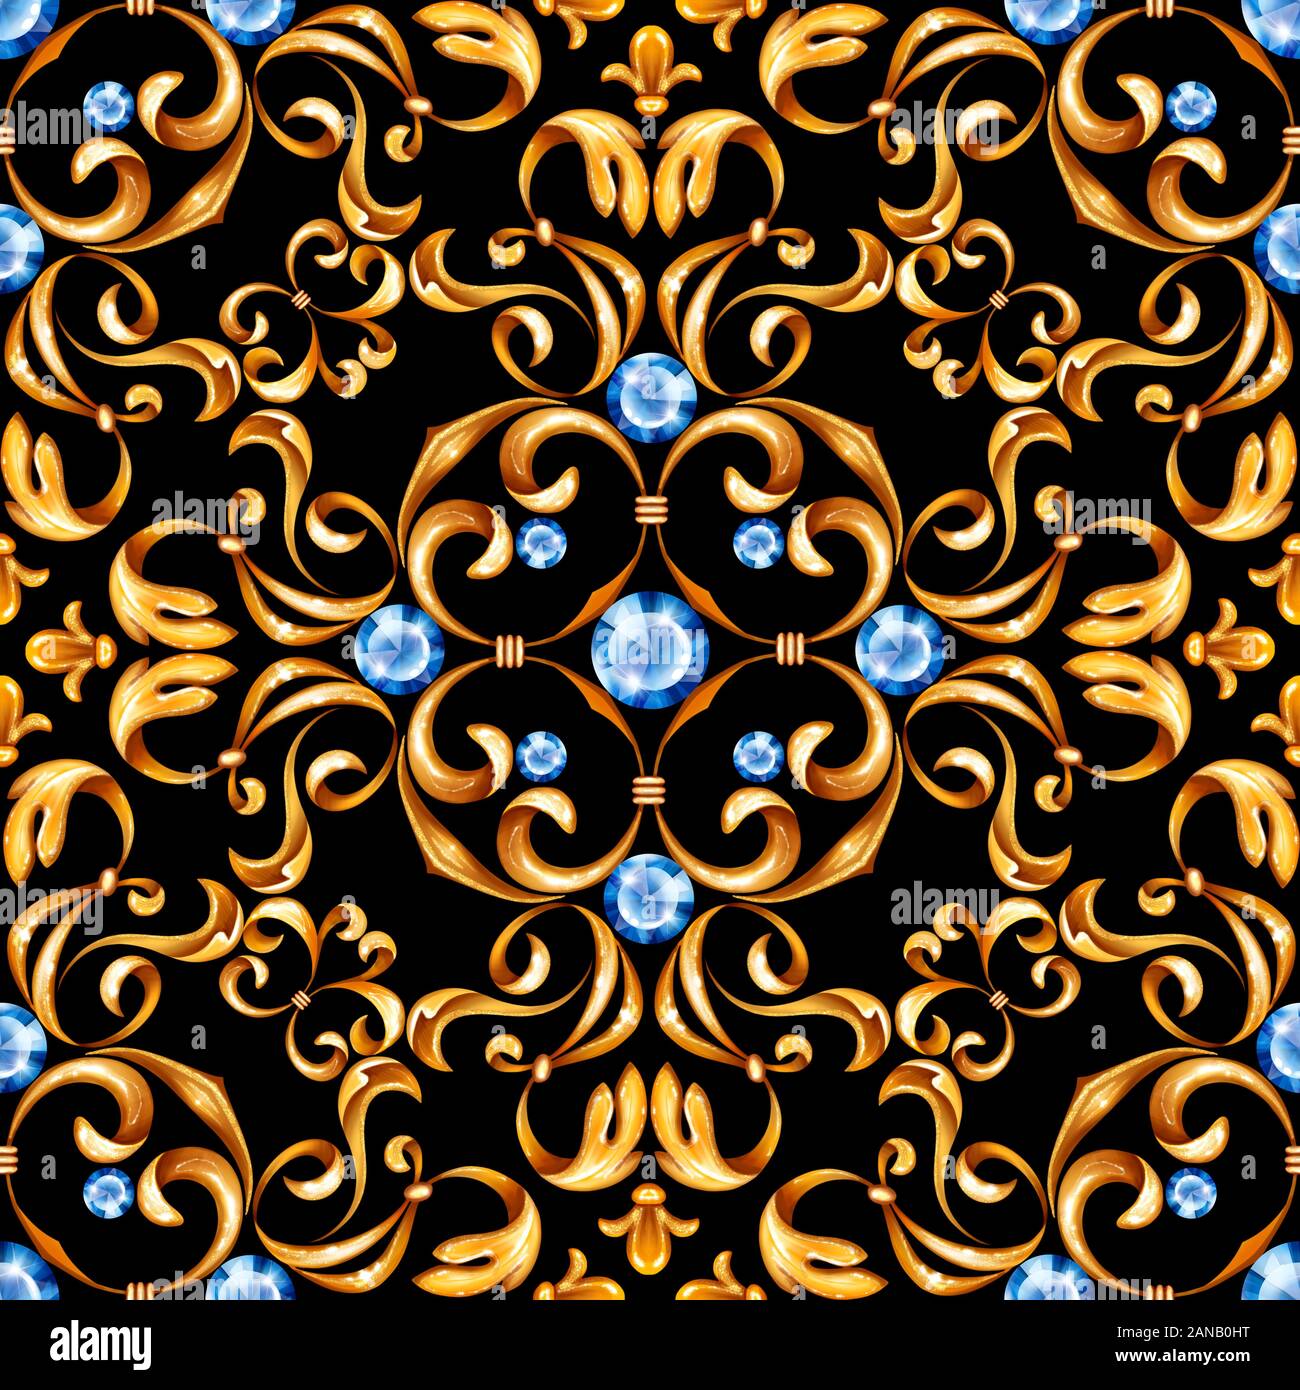 Seamless baroque pattern with decorative golden leaves Stock Photo